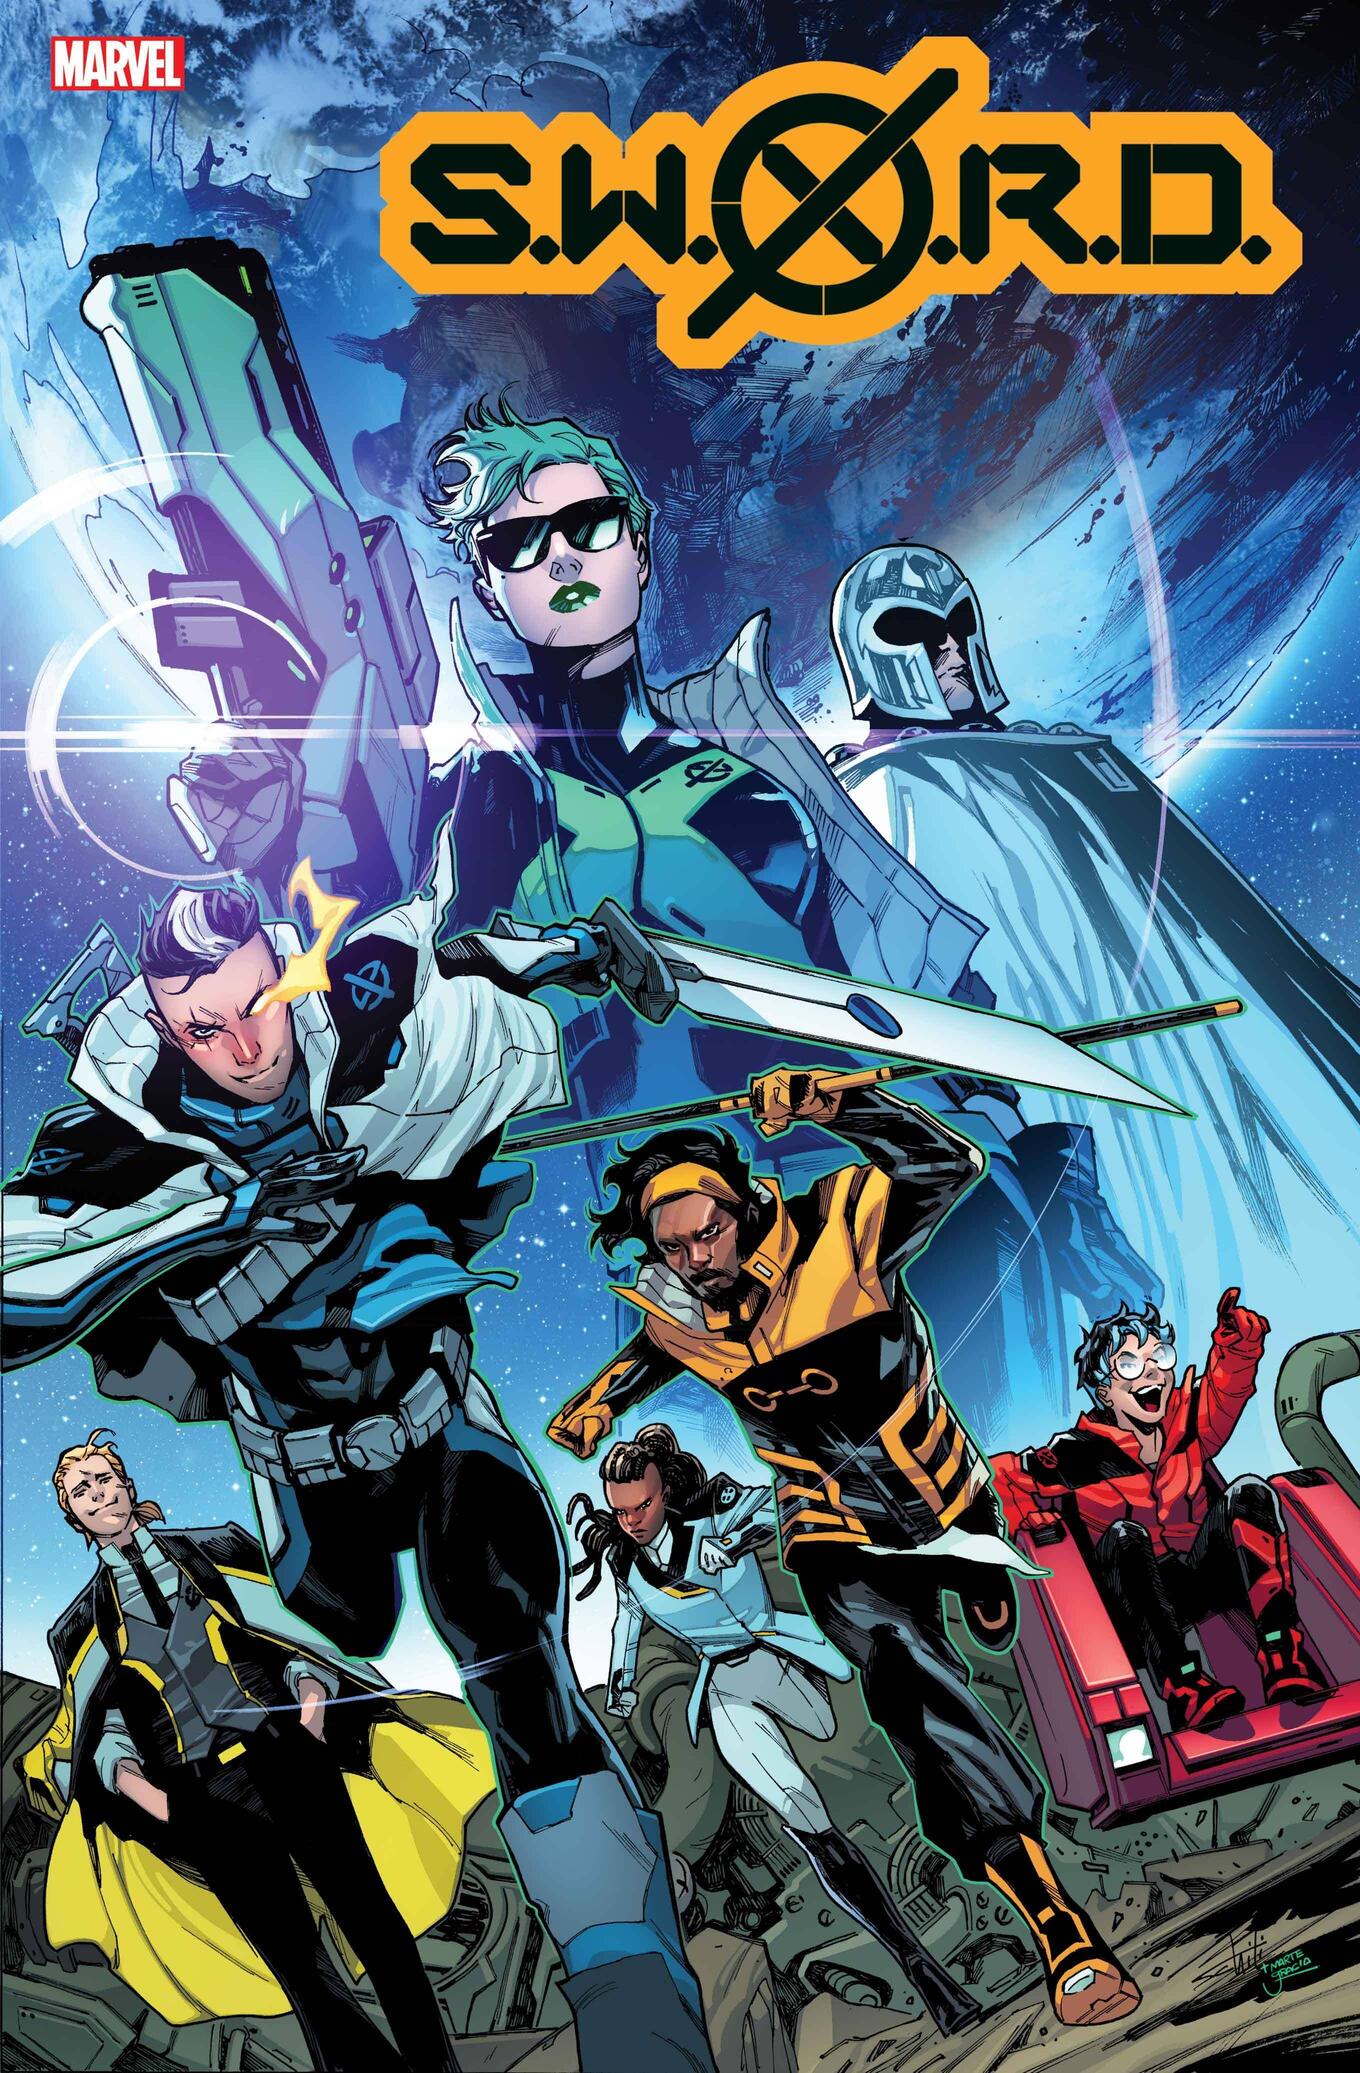 Abigail Brand, Magneto, Cable, Manifold, Whiz Kid, Fabian Cortez, and Frenzy on the cover of SWORD #1, Marvel Comics (2020).